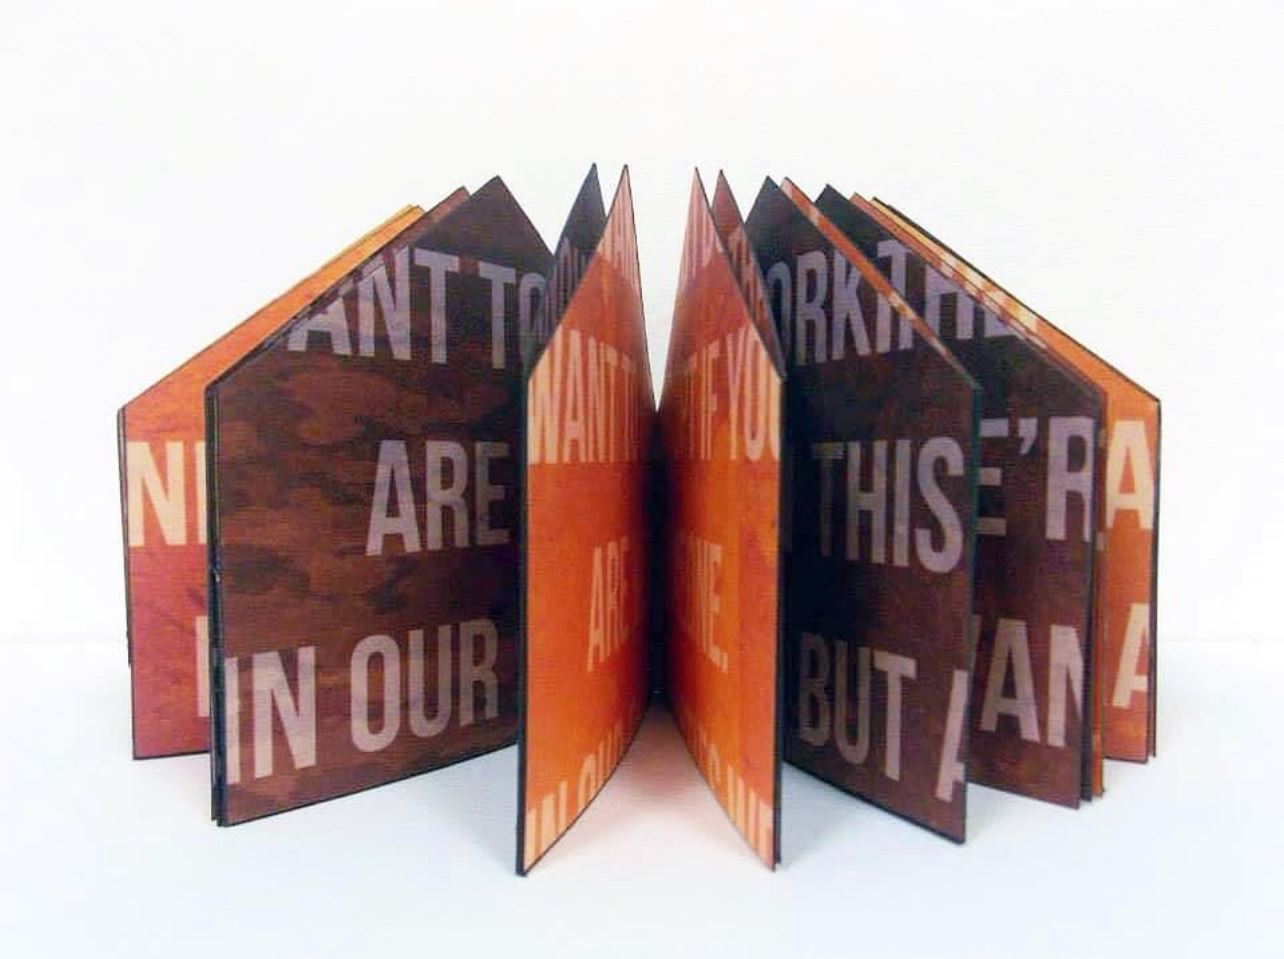 Handmade book structure with polygon shaped pages printed with white text on brown and orange pages.